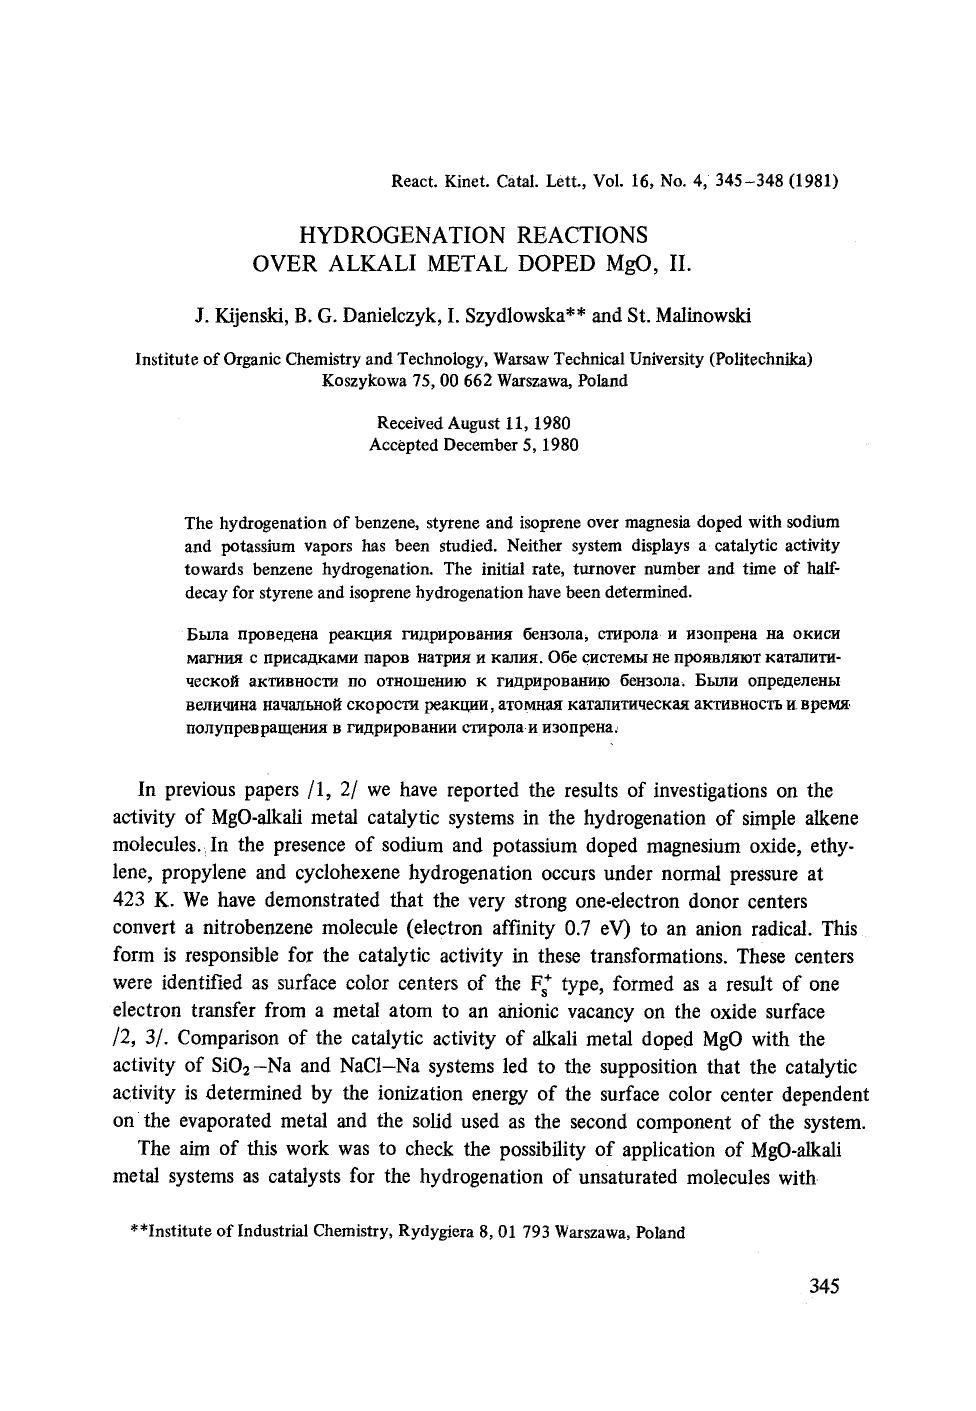 Hydrogenation reactions over alkali metal doped MgO, II by Unknown